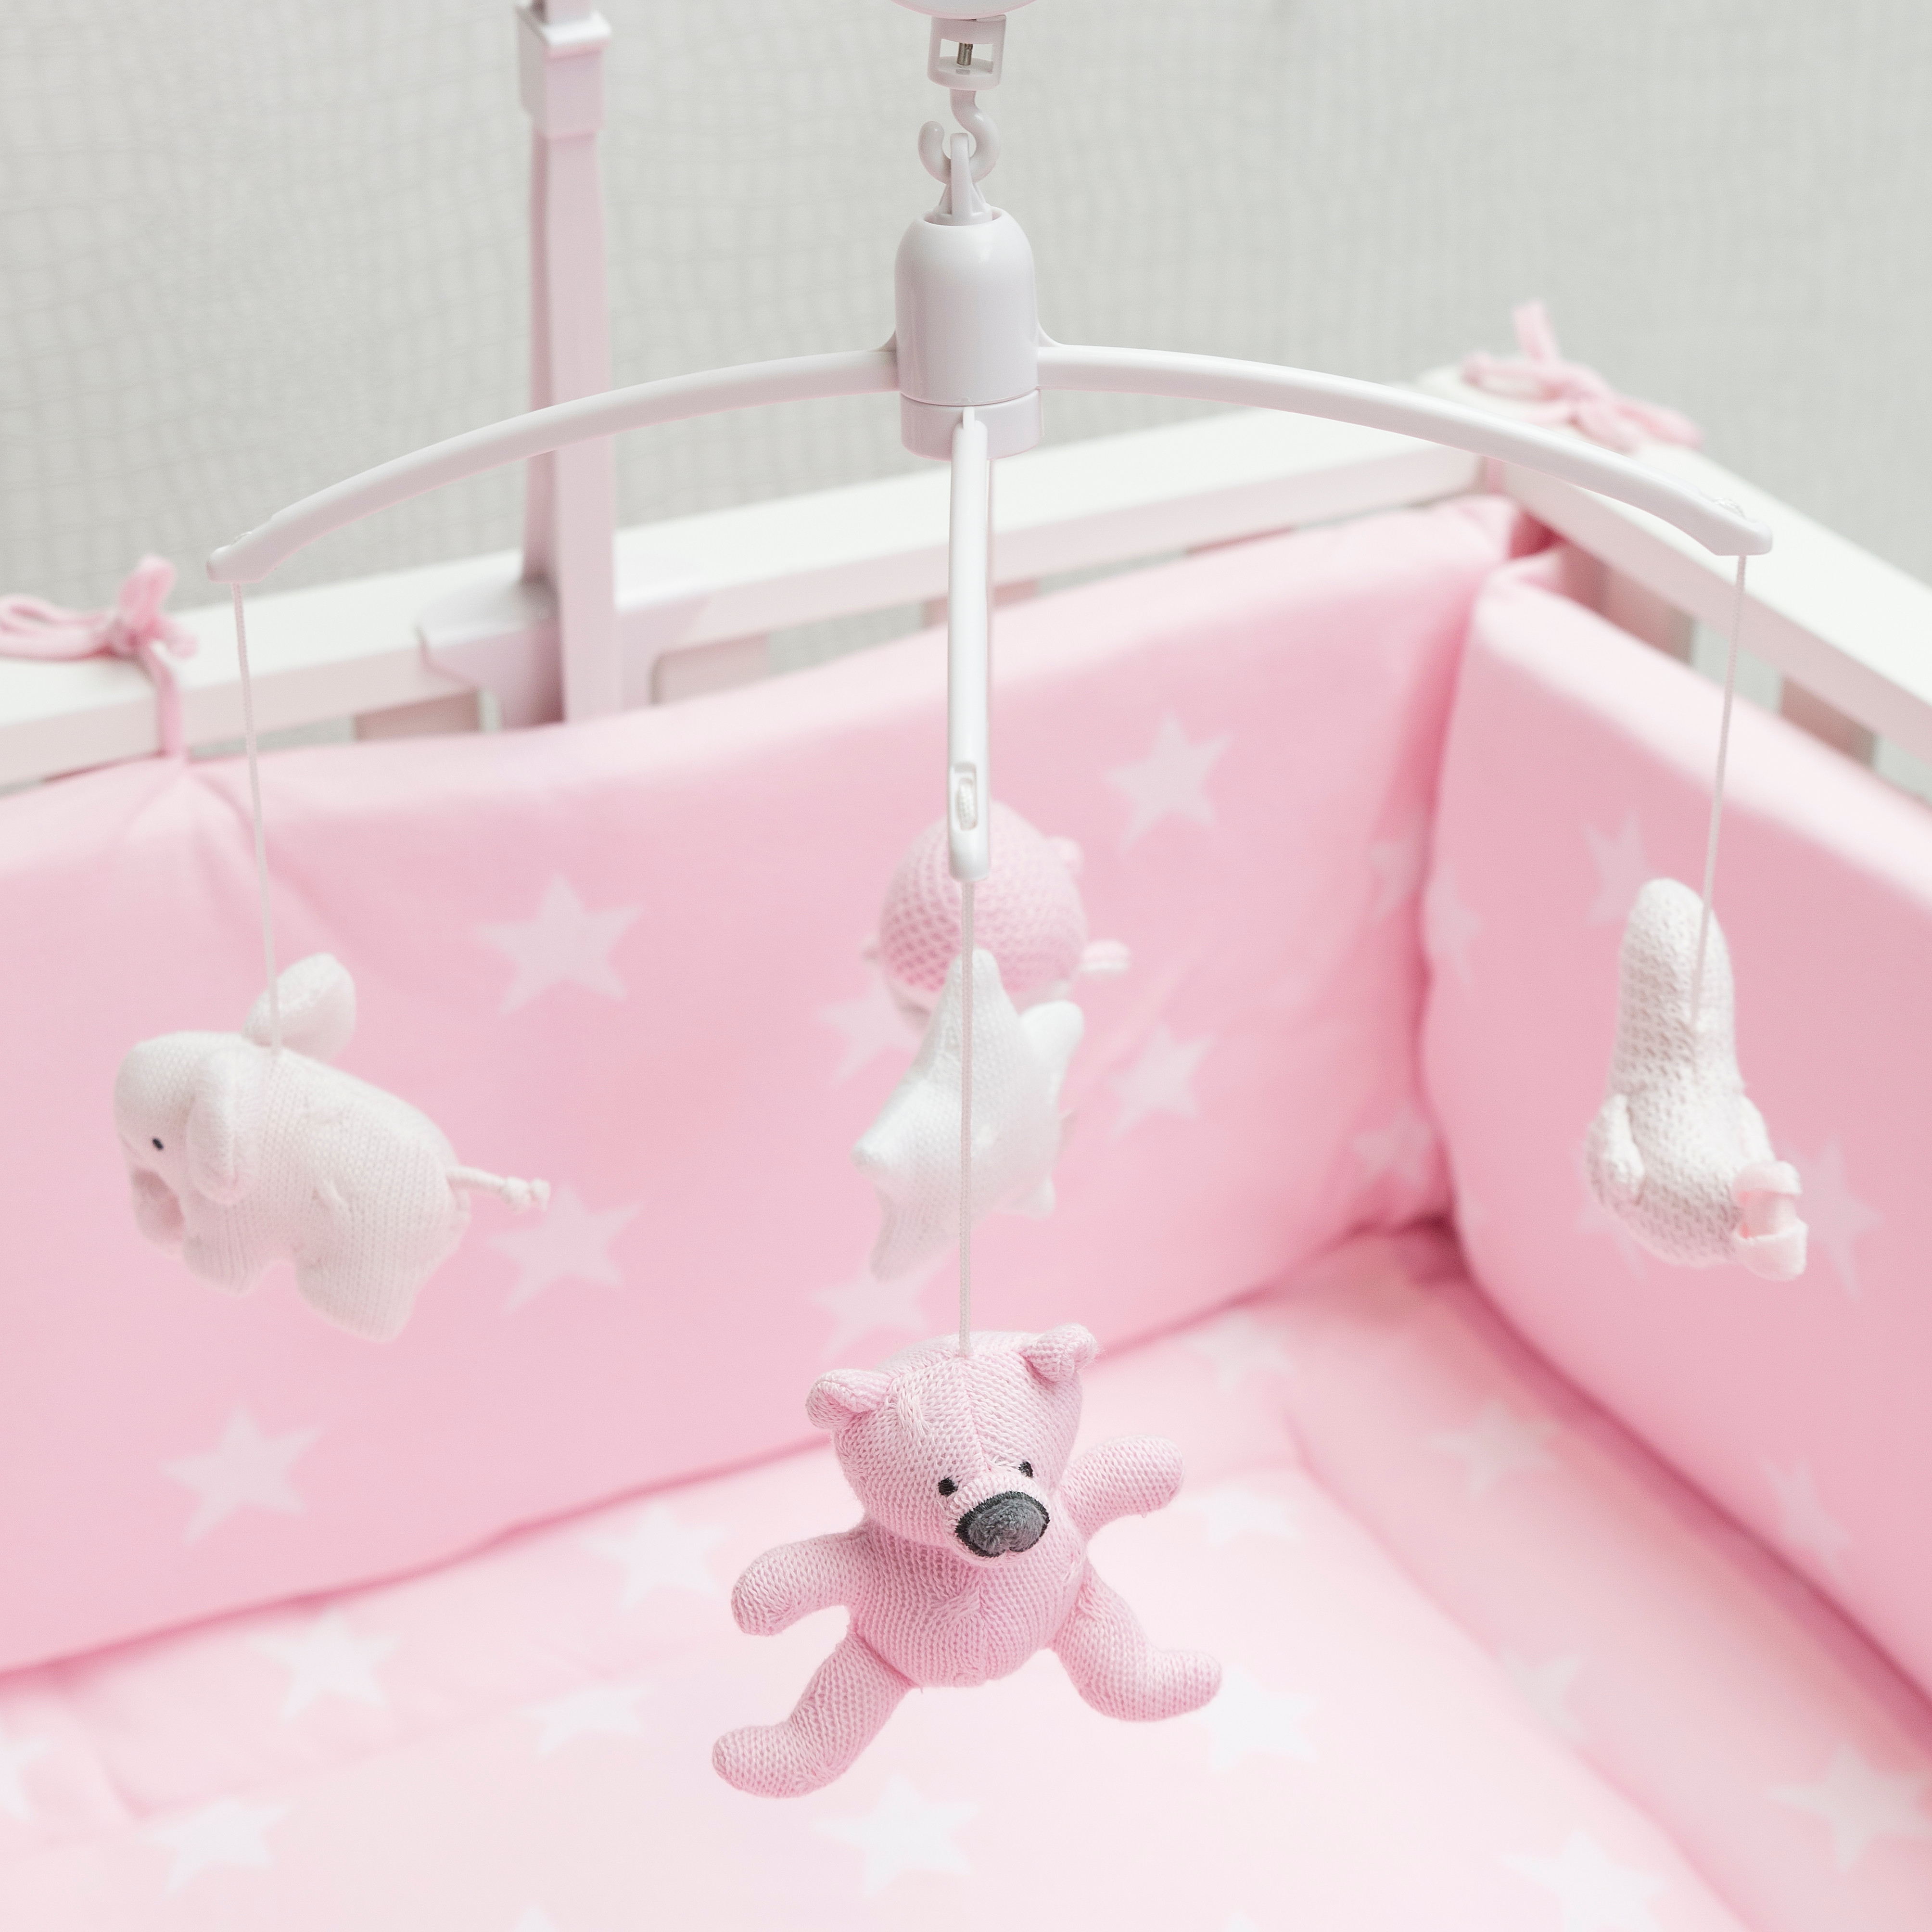 Musical mobile classic pink/baby pink/white